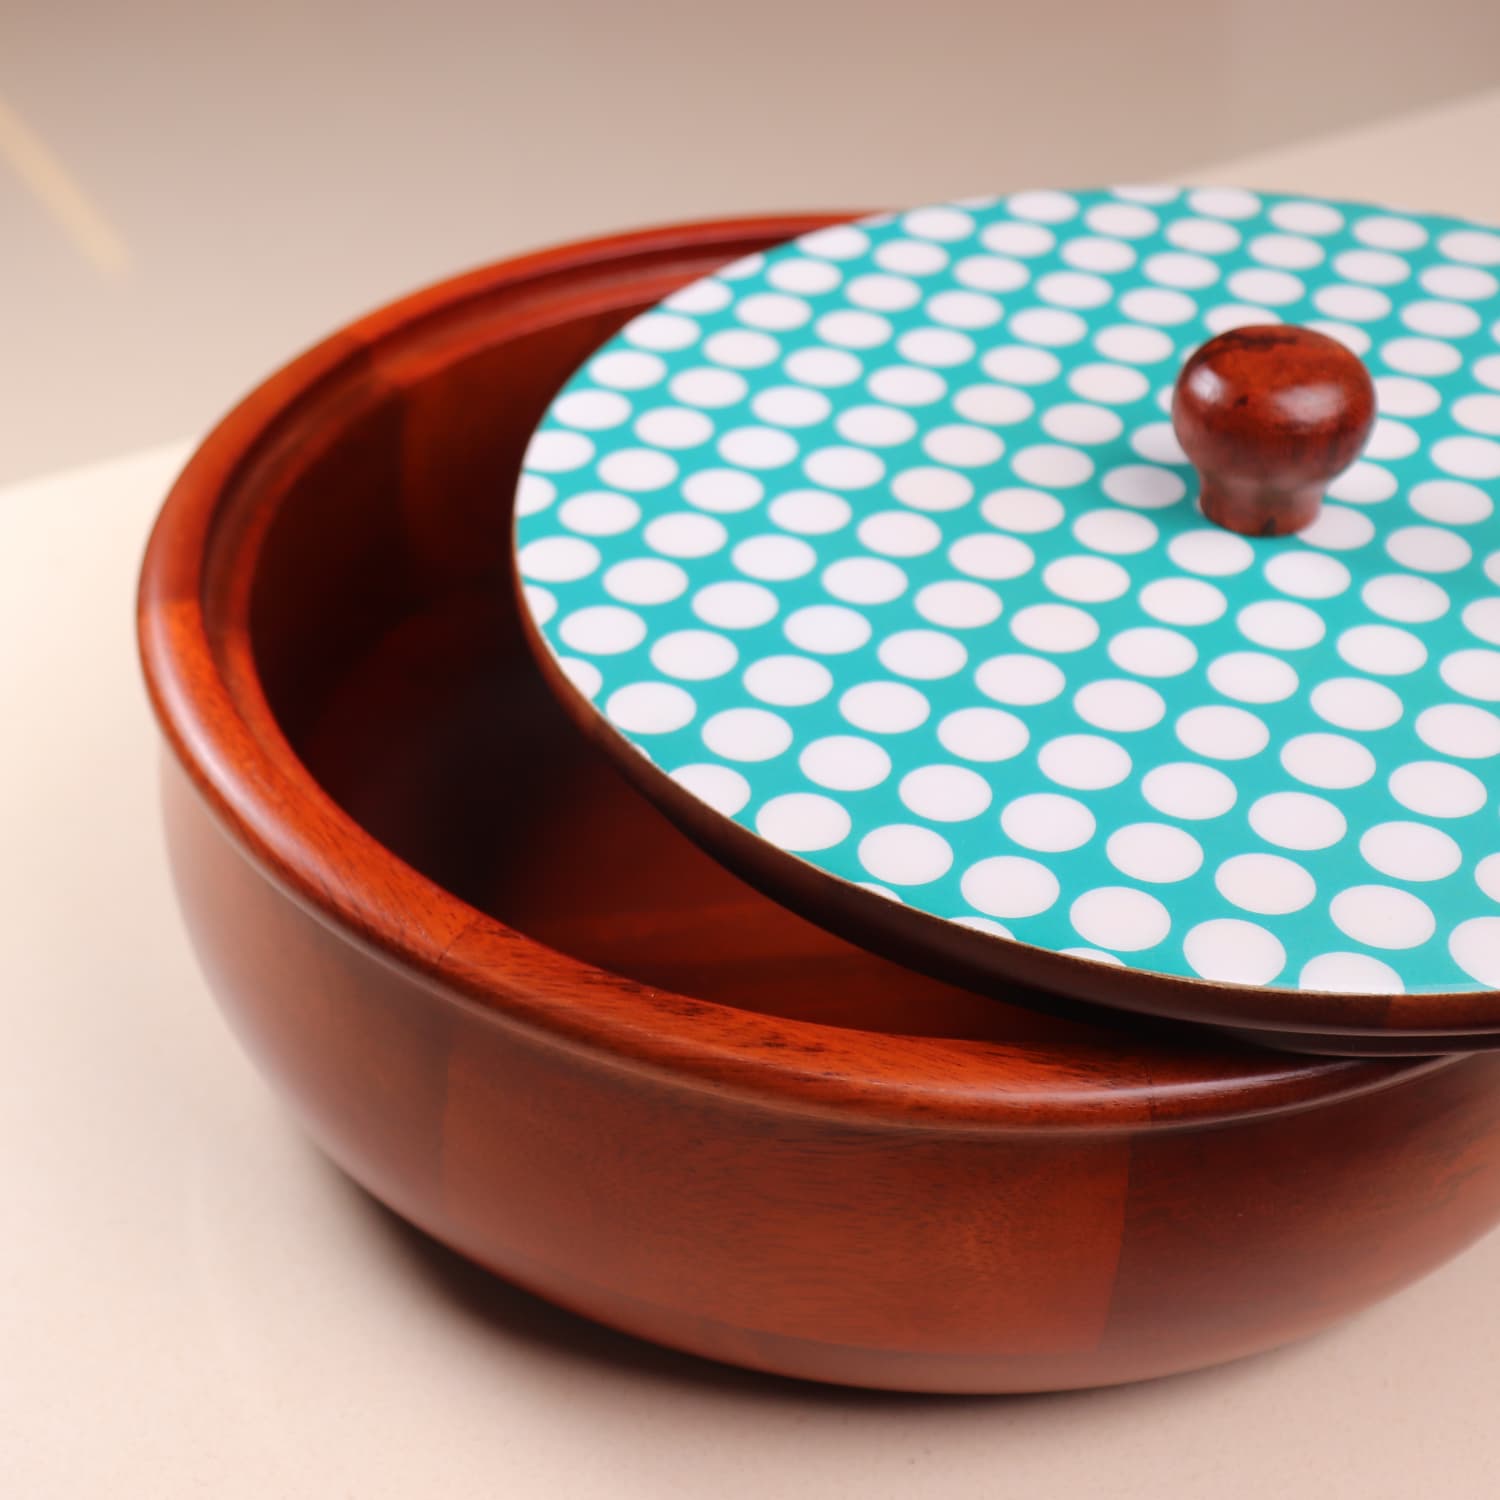 A premium wooden Roti Box with a slightly open matching lid. The lid has a turquoise background with white polka dots and a wooden knob handle. This elegant piece, often regarded as the best wooden Chapati box in India, rests on a smooth, light-colored surface. 

Introducing The Dot Legacy Chapati Box by LOOSEBUCKET, which brings both functionality and style to your kitchen.